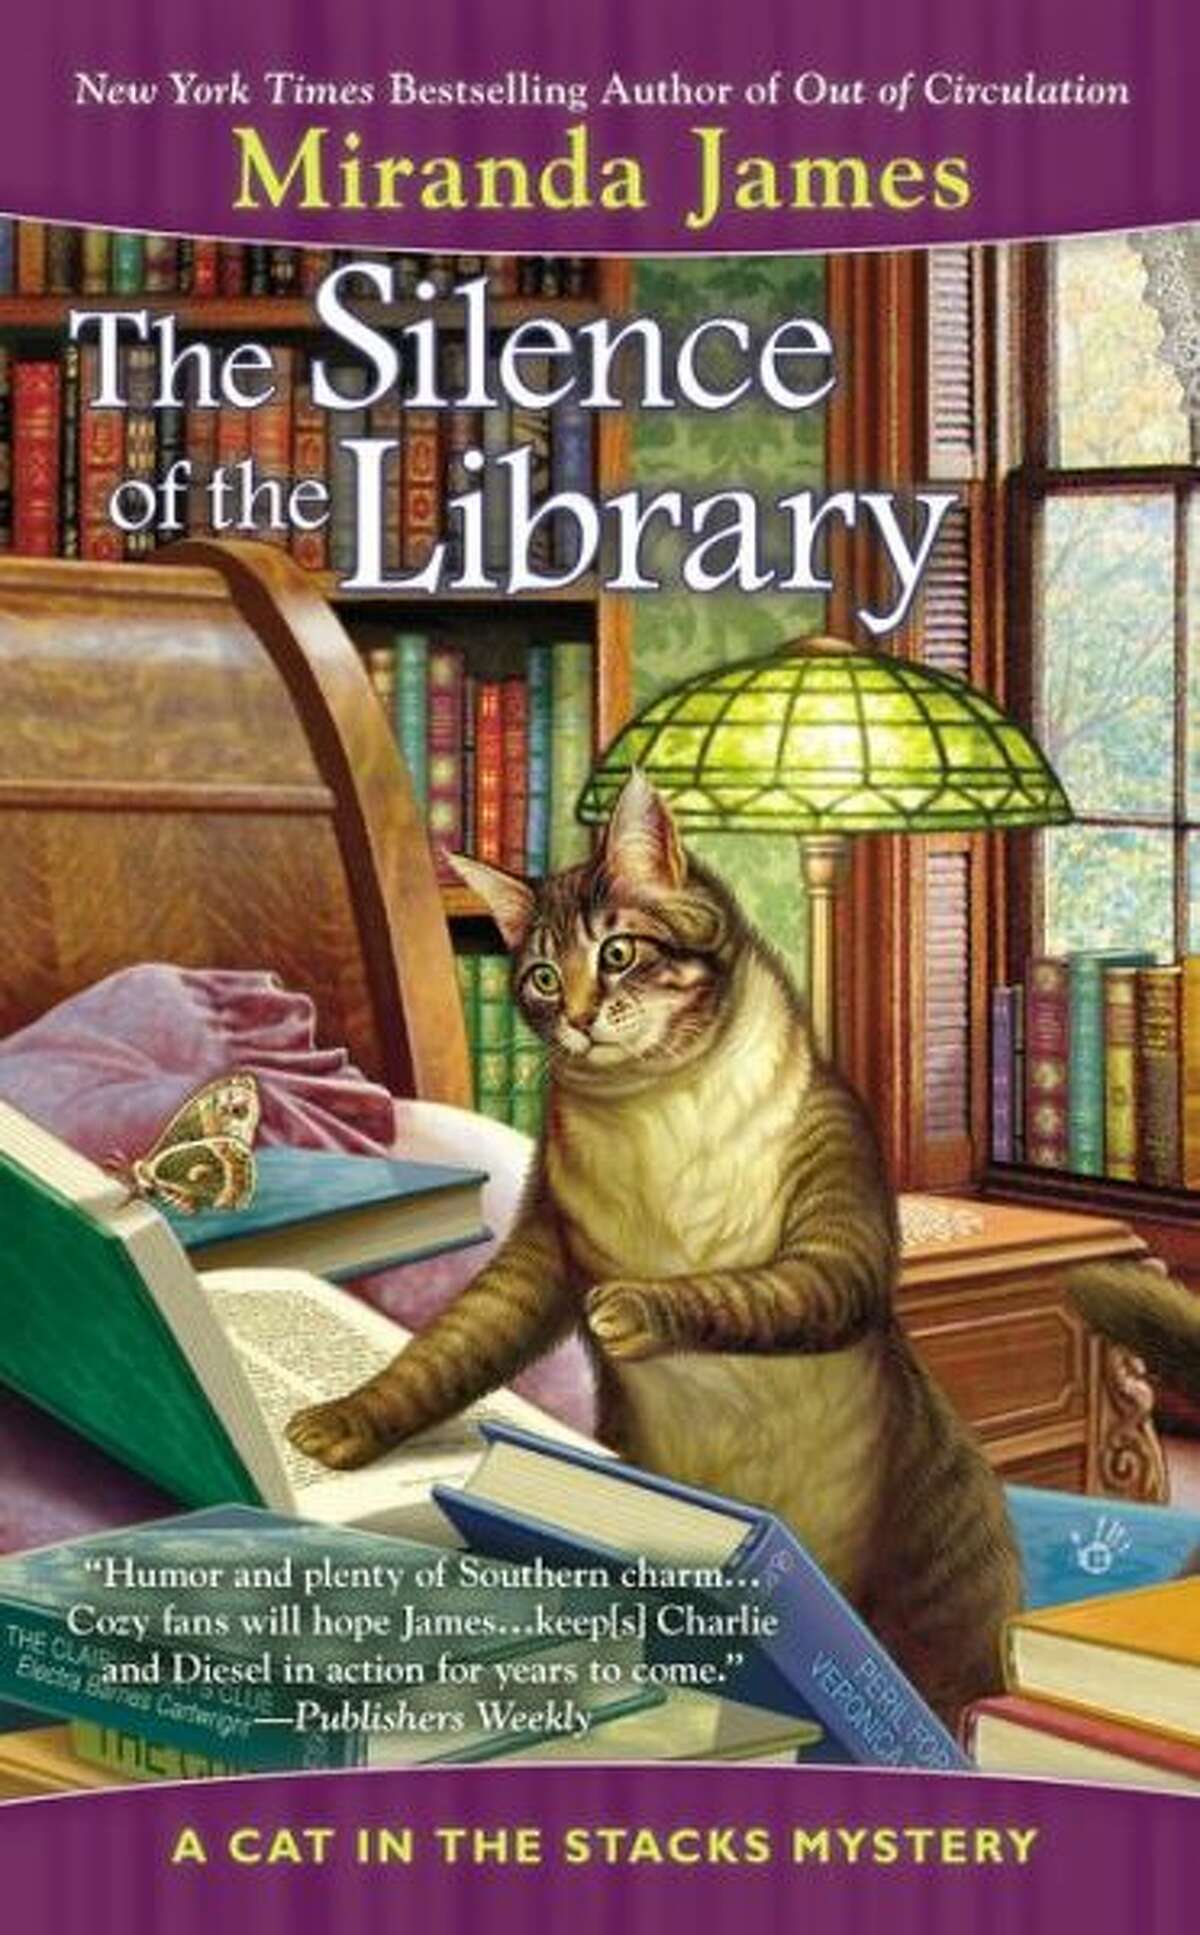 "The Silence of the Library" by Miranda James